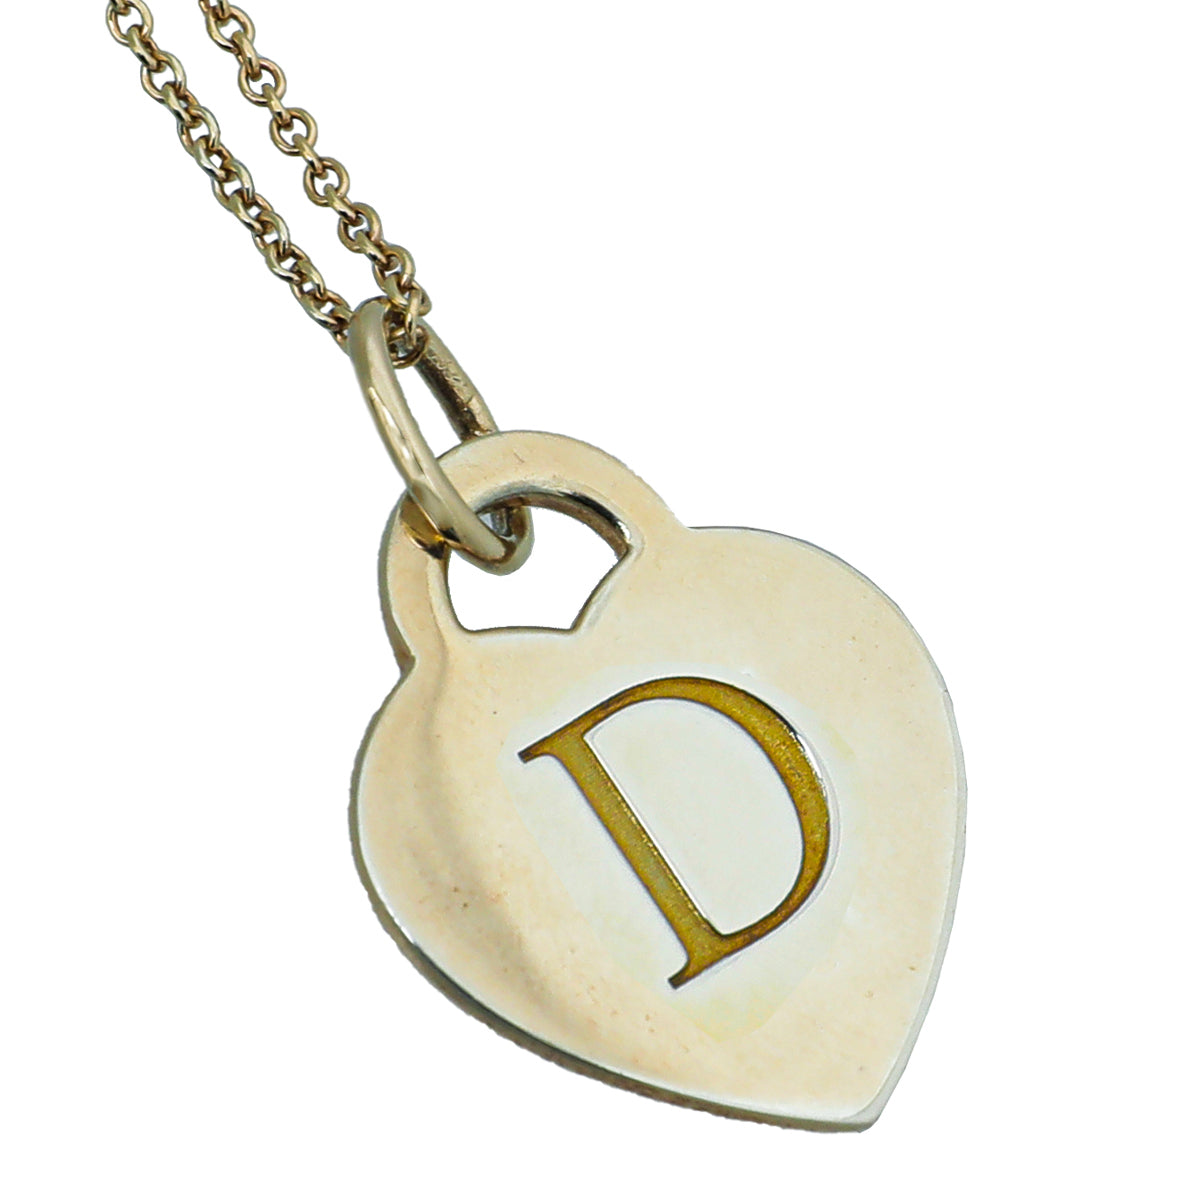 Tiffany & Co Silver Gold Plated Heart Tag "D" Letter Pendant Necklace